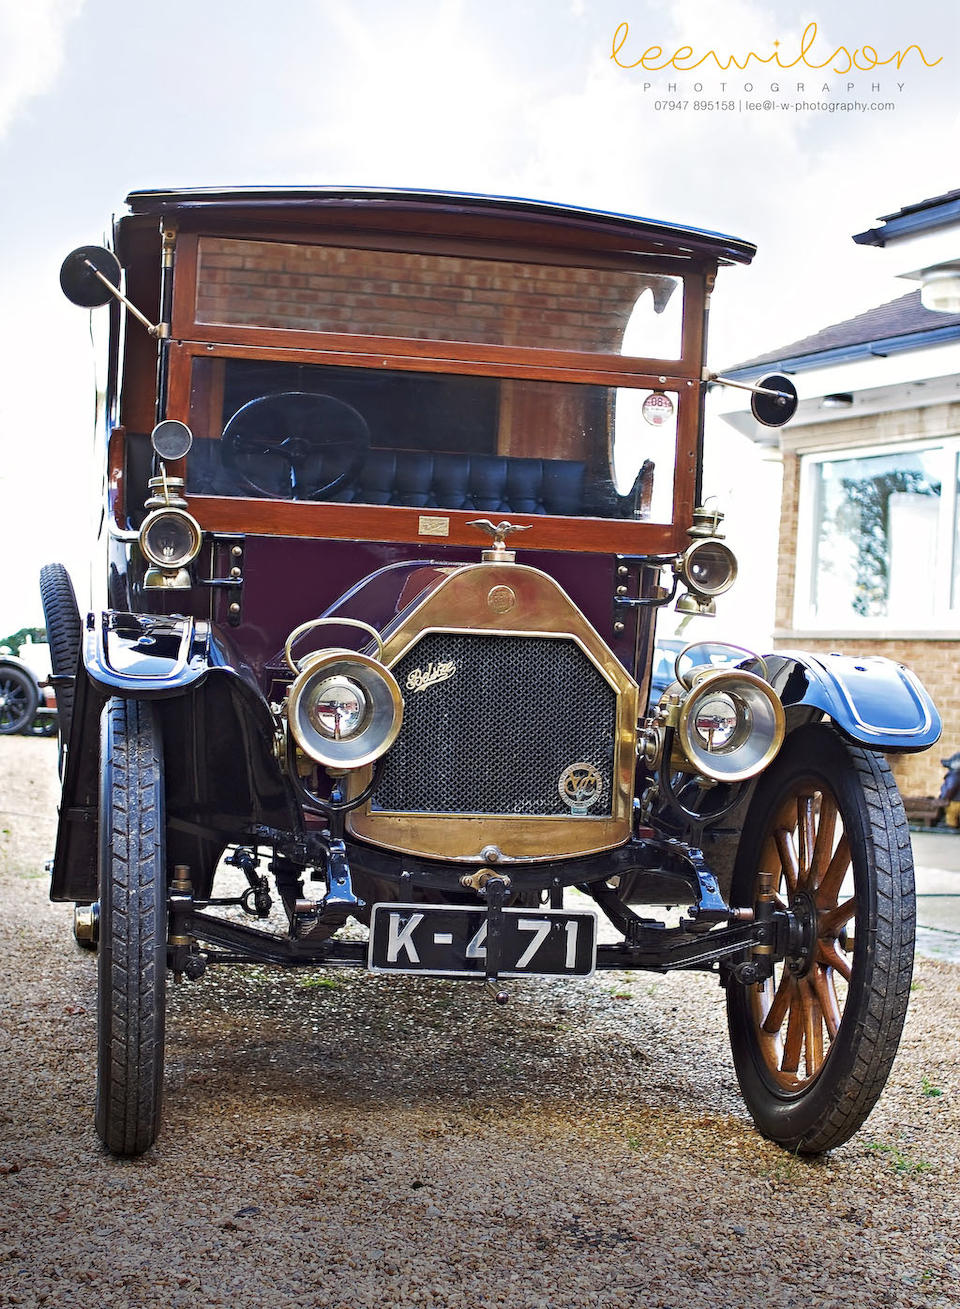 1914 Belsize 'Gown' Van  Chassis no. to be advised